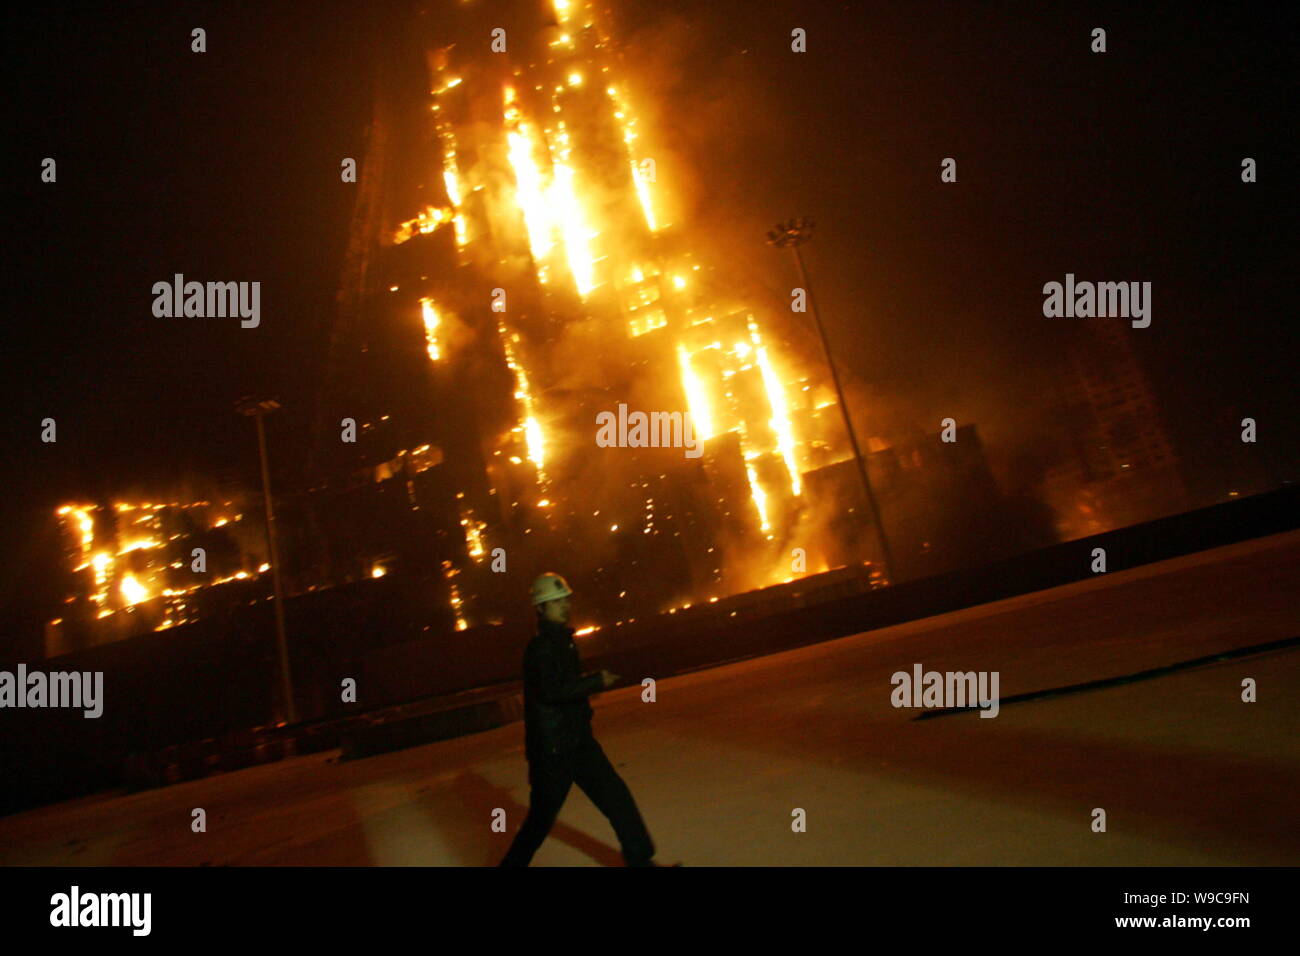 A man walks past the Mandarin Oriental Hotel building seen on fire near the new CCTV Tower during the Lantern Festival in Beijing, China, Monday, 9 Fe Stock Photo